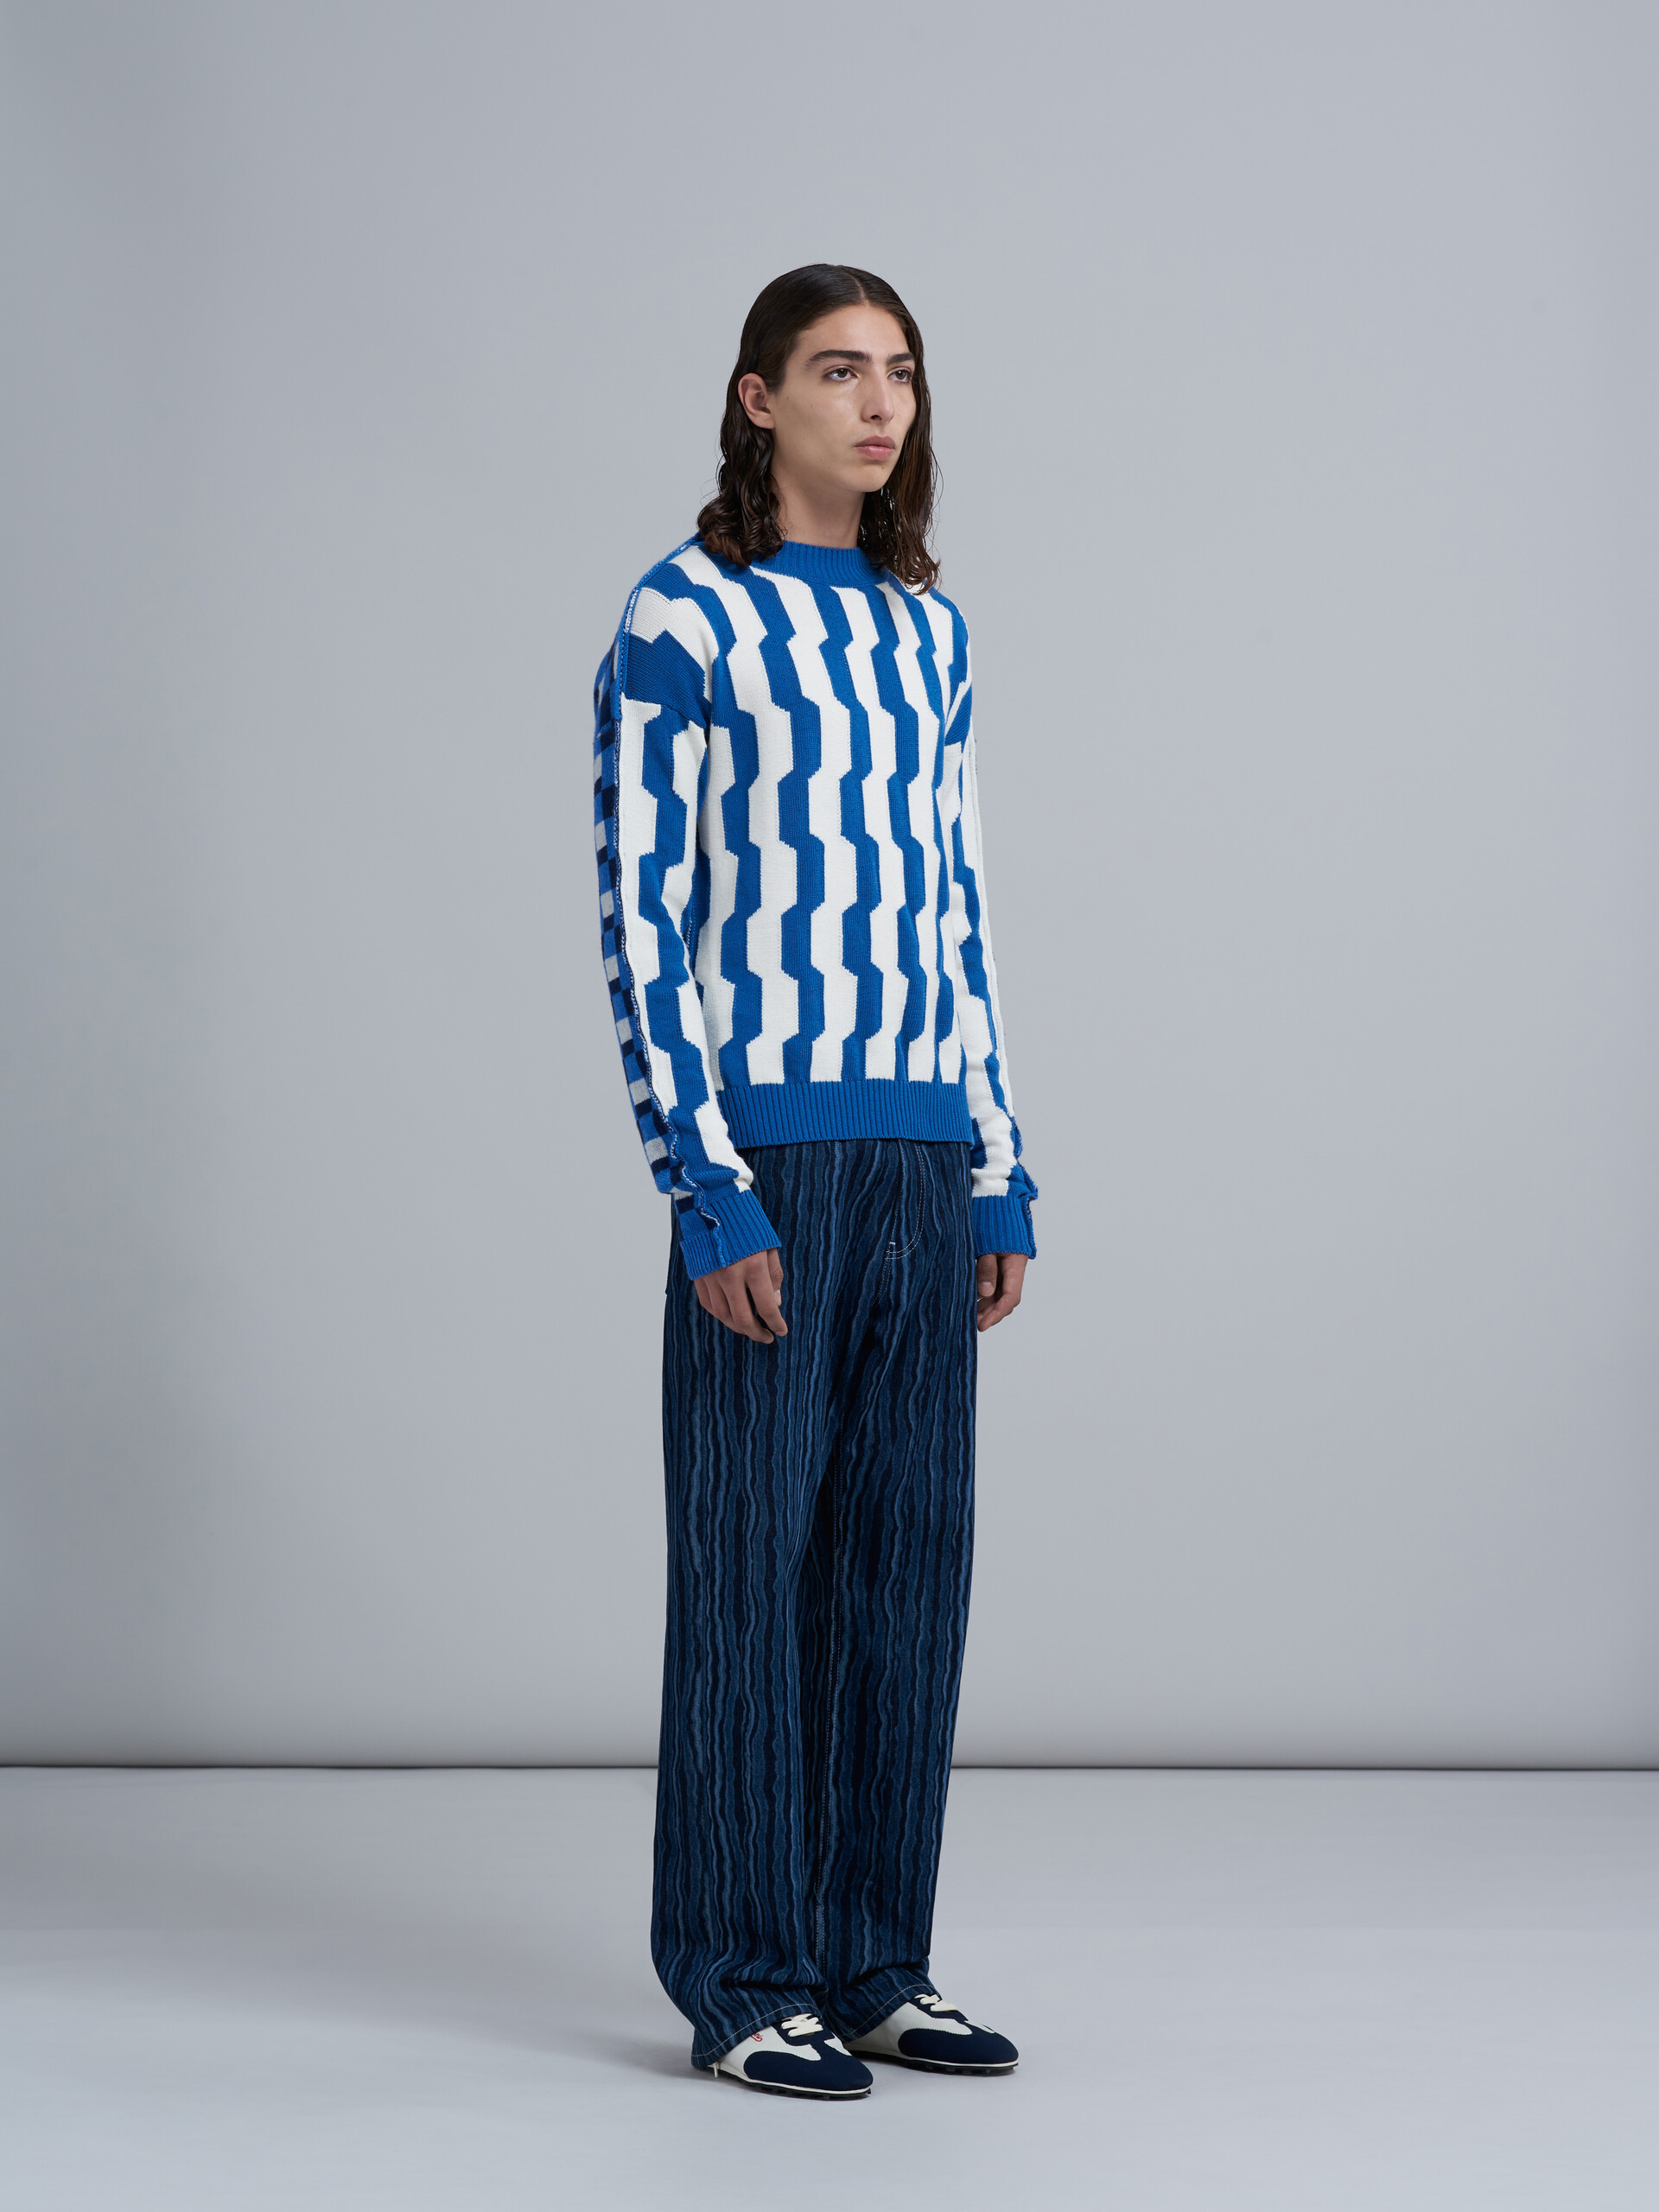 Blue and white crepe and Shetland wool sweater - Pullovers - Image 5